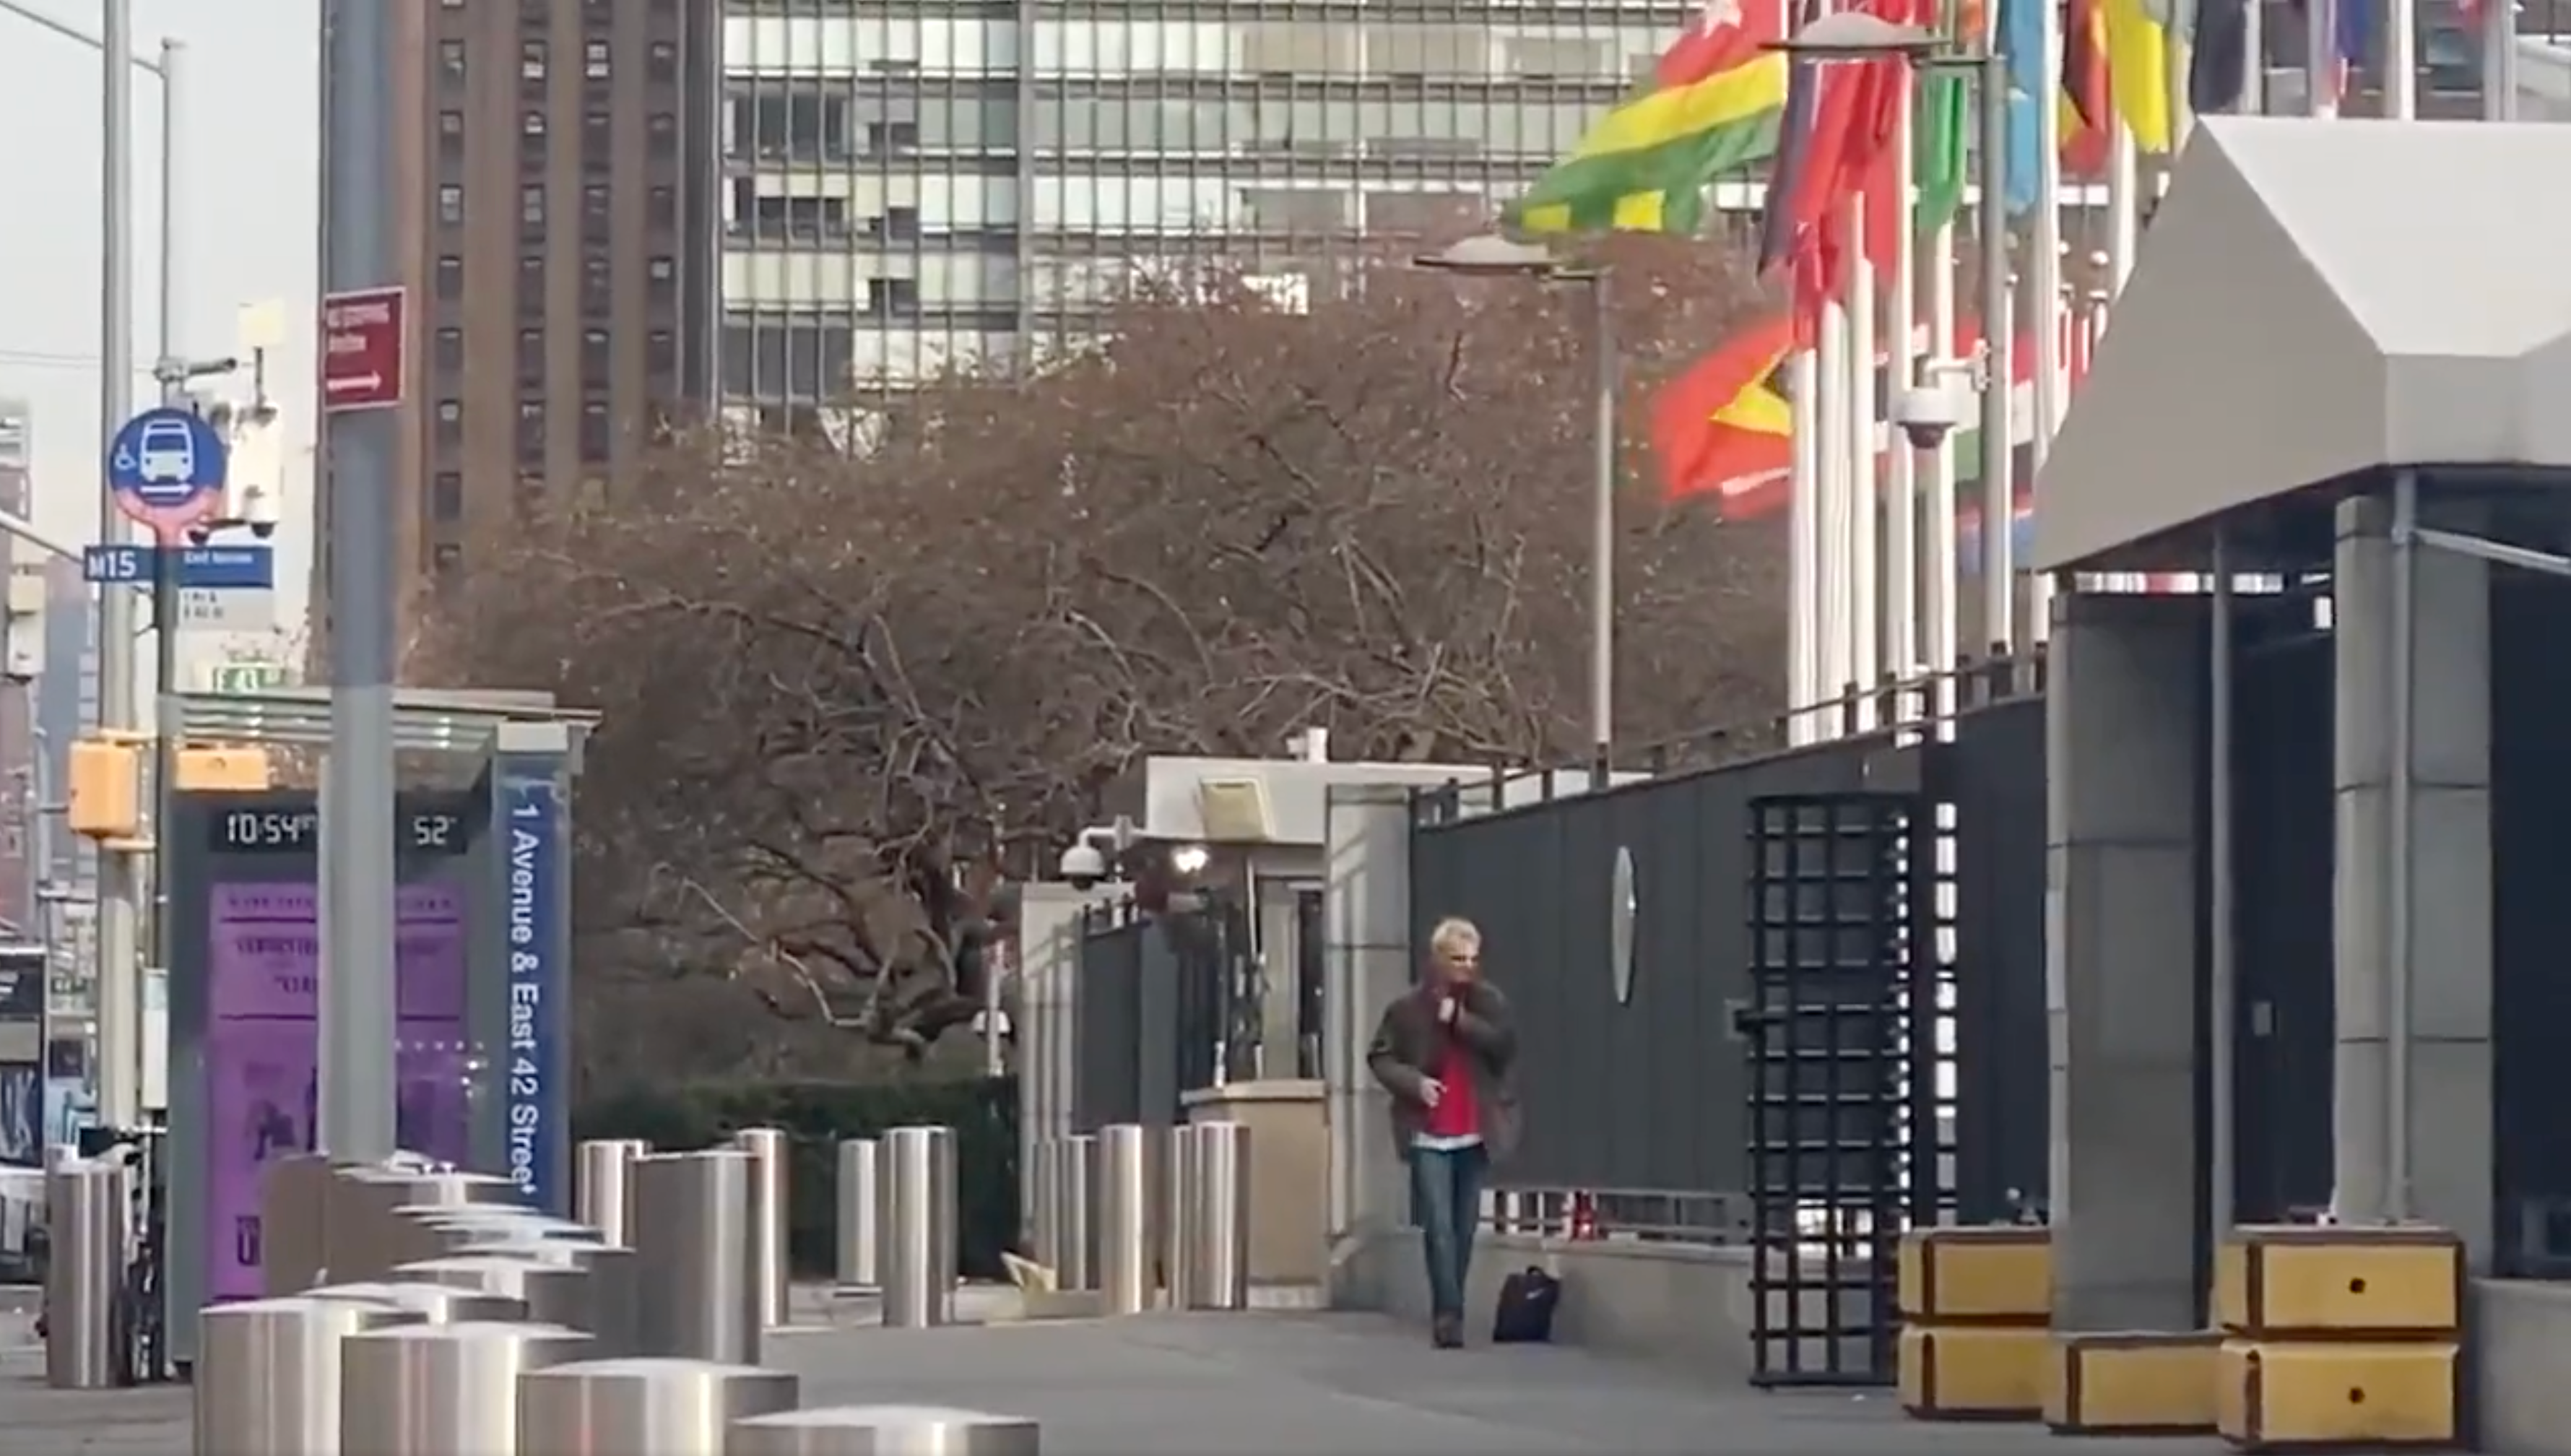 A man with what appears to be a firearm is seen pacing outside the United Nations